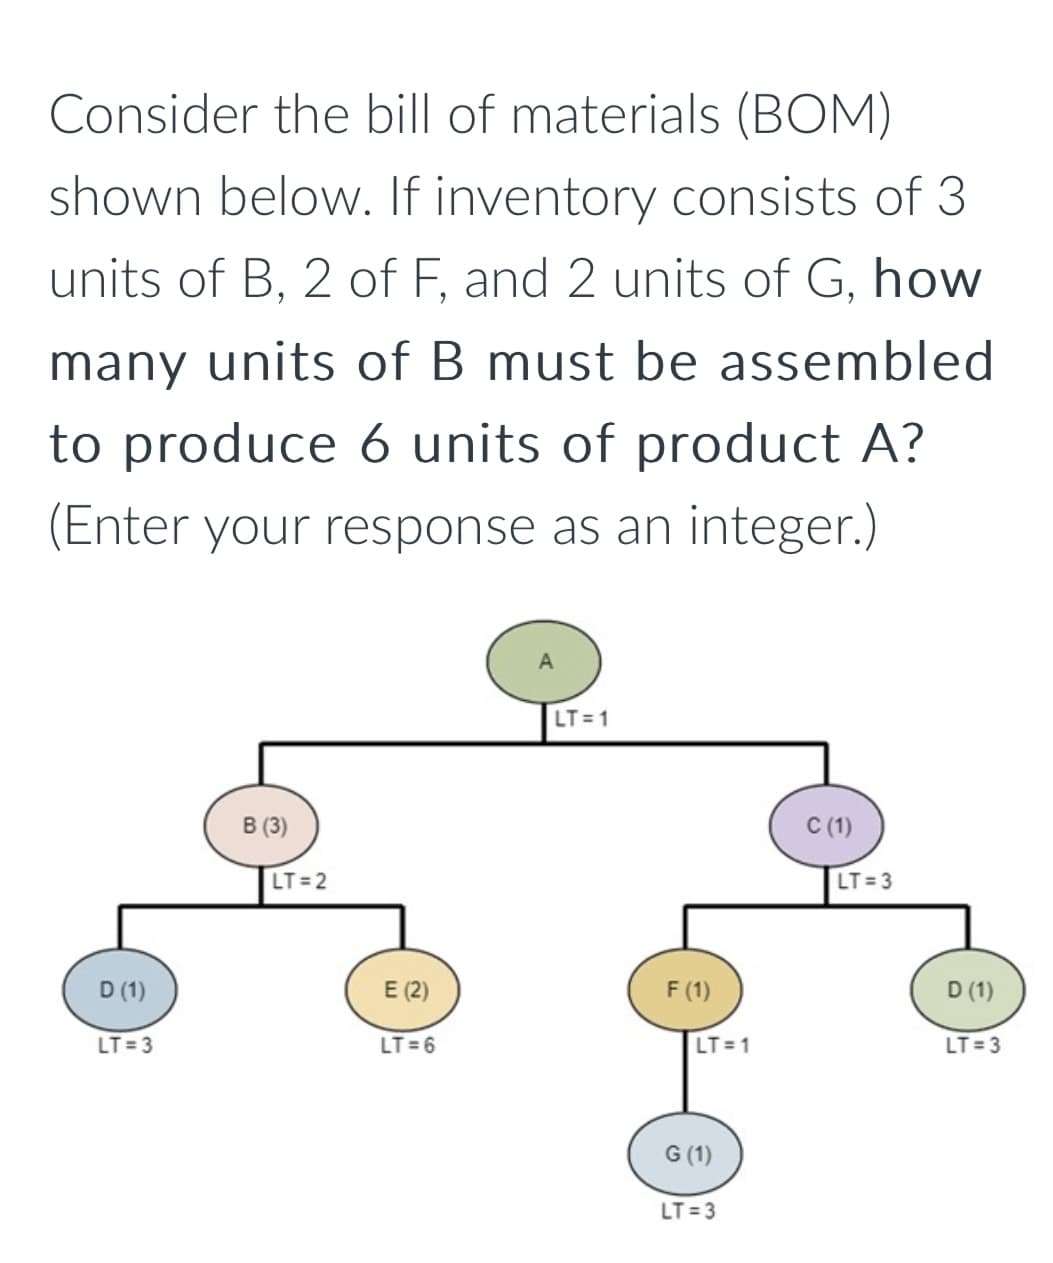 Consider the bill of materials (BOM)
shown below. If inventory consists of 3
units of B, 2 of F, and 2 units of G, how
many units of B must be assembled
to produce 6 units of product A?
(Enter your response as an integer.)
D (1)
LT=3
B (3)
LT=2
E (2)
LT=6
LT=1
F (1)
LT=1
G (1)
LT=3
C (1)
LT=3
D (1)
LT=3